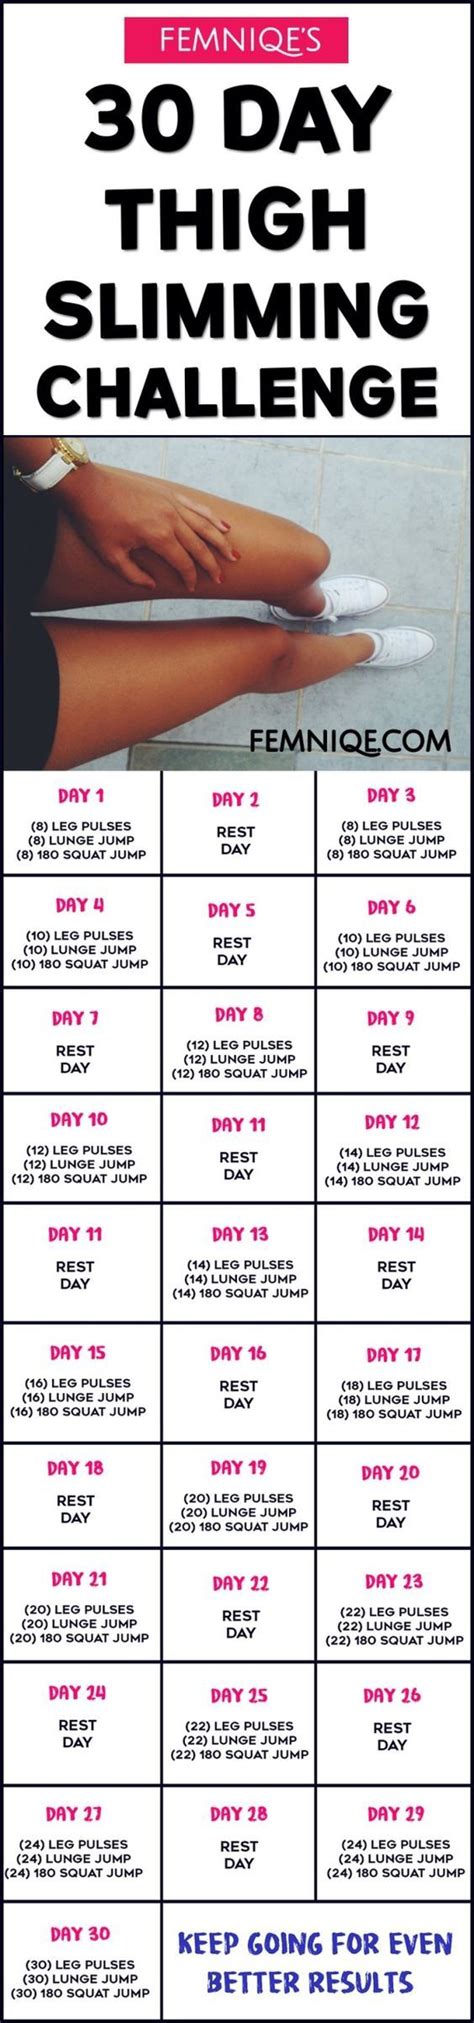 30 Day Thigh Slimming Challenge If You Want To Know How To Lose Thigh